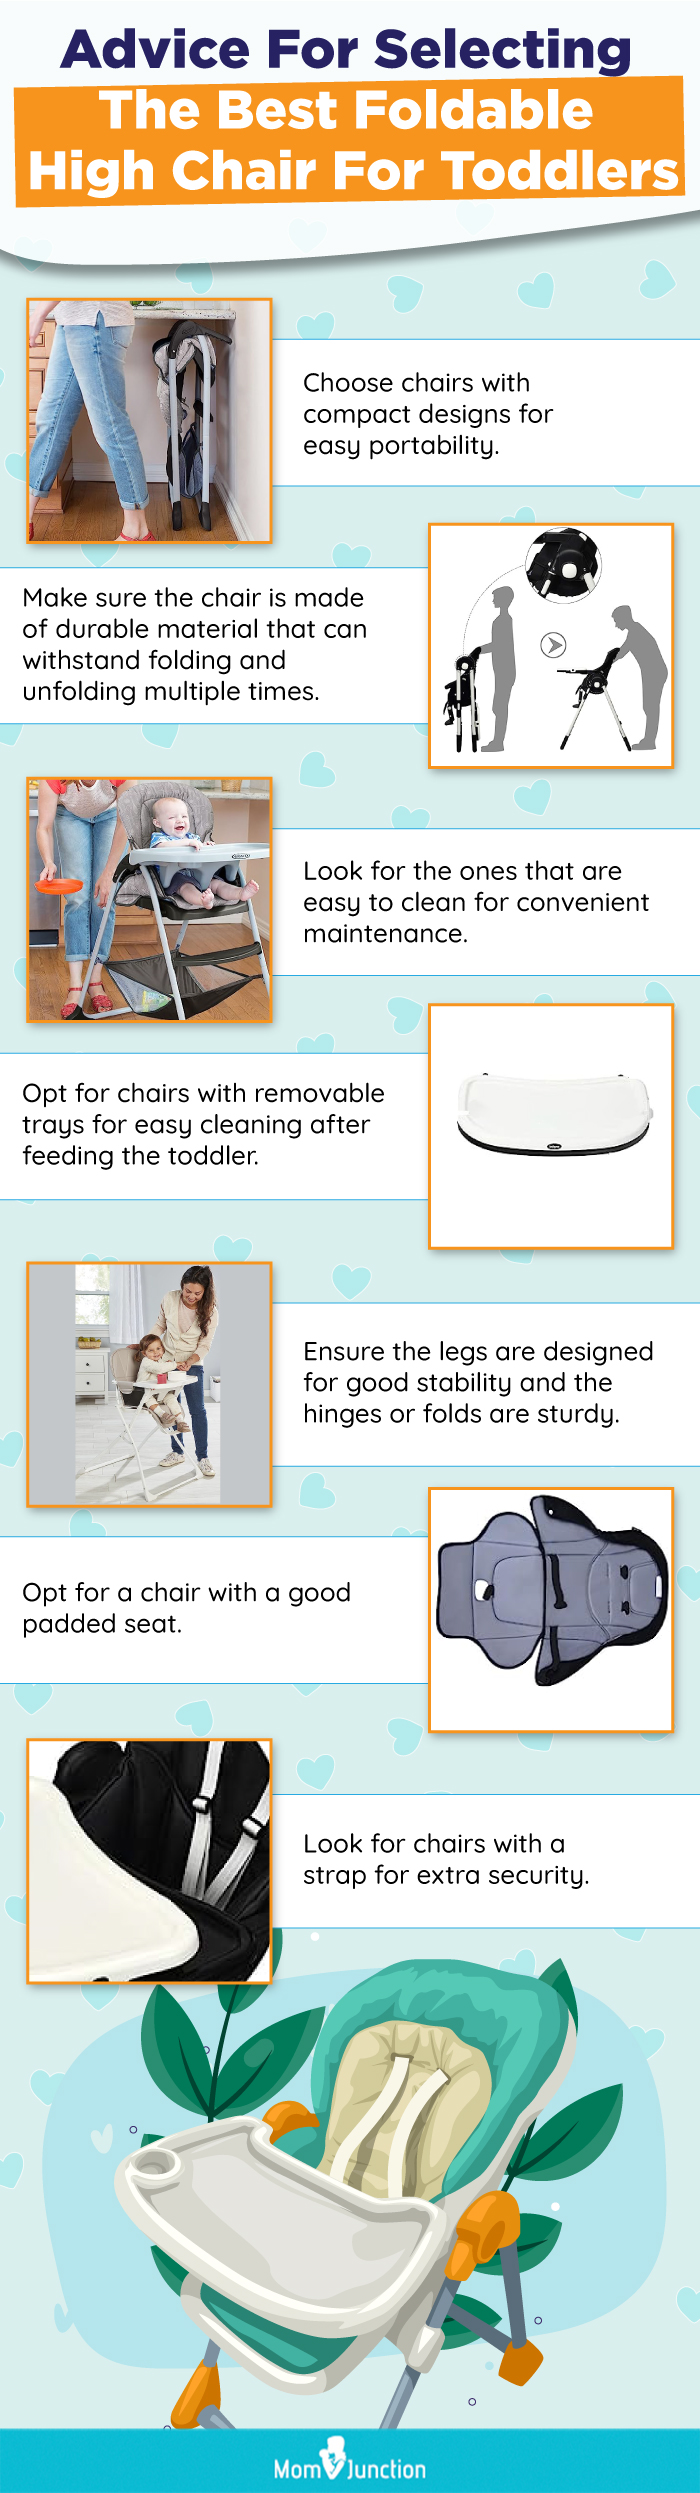 Advice For Selecting The Best Foldable High Chair For Toddlers(infographic)